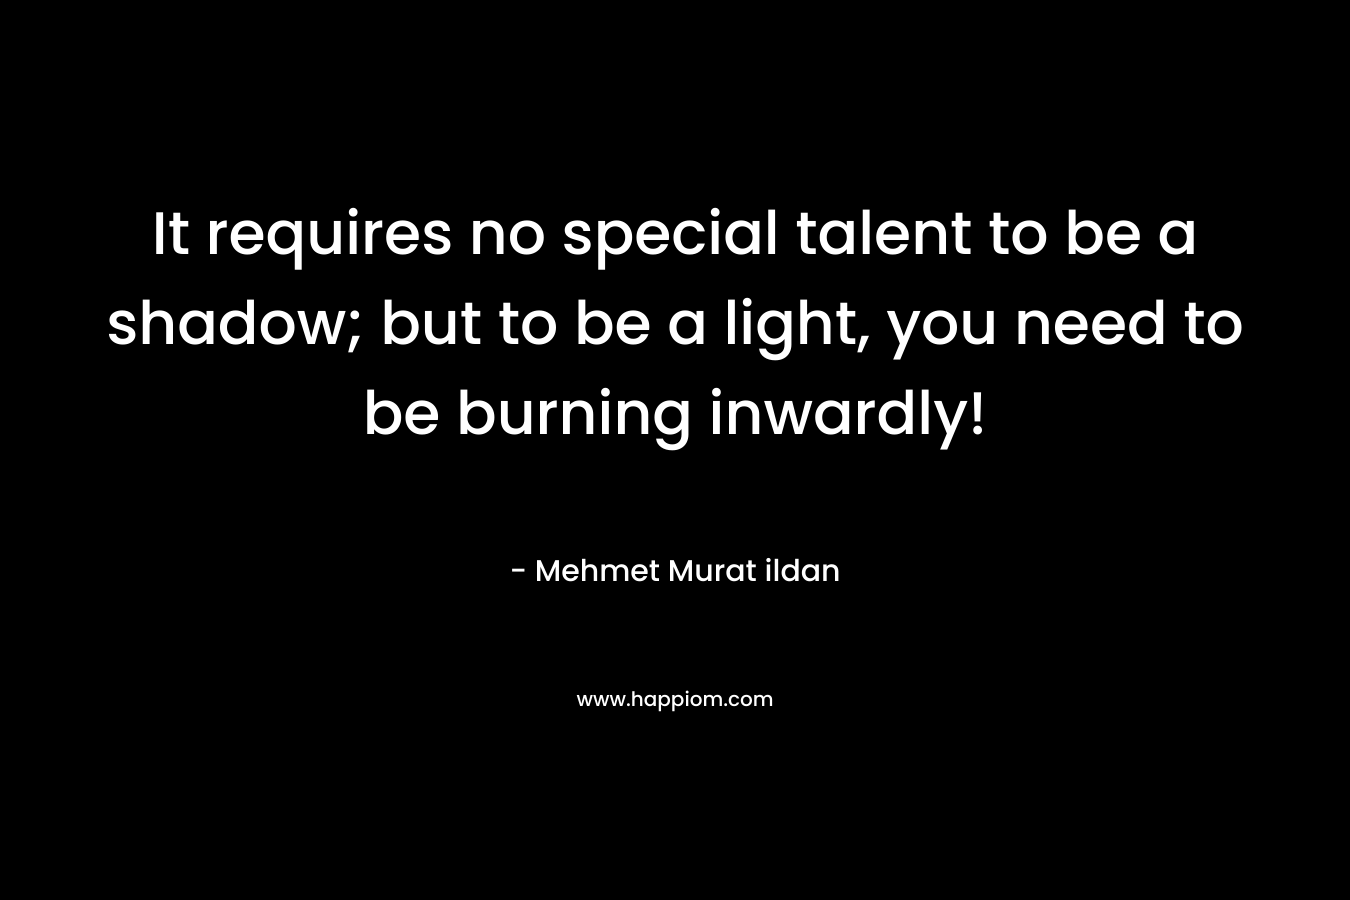 It requires no special talent to be a shadow; but to be a light, you need to be burning inwardly!